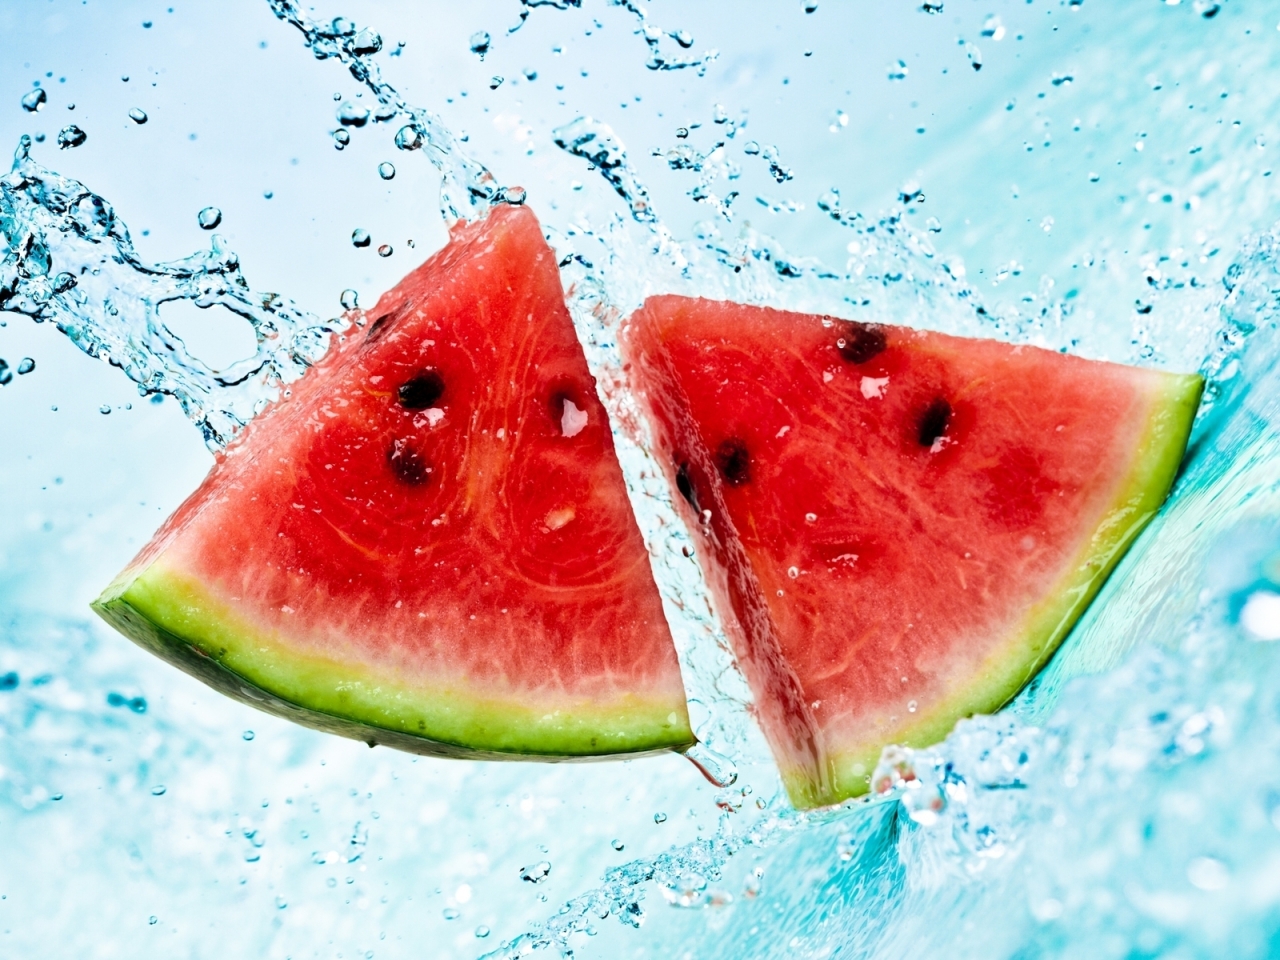 Watermelon Slices for 1280 x 960 resolution